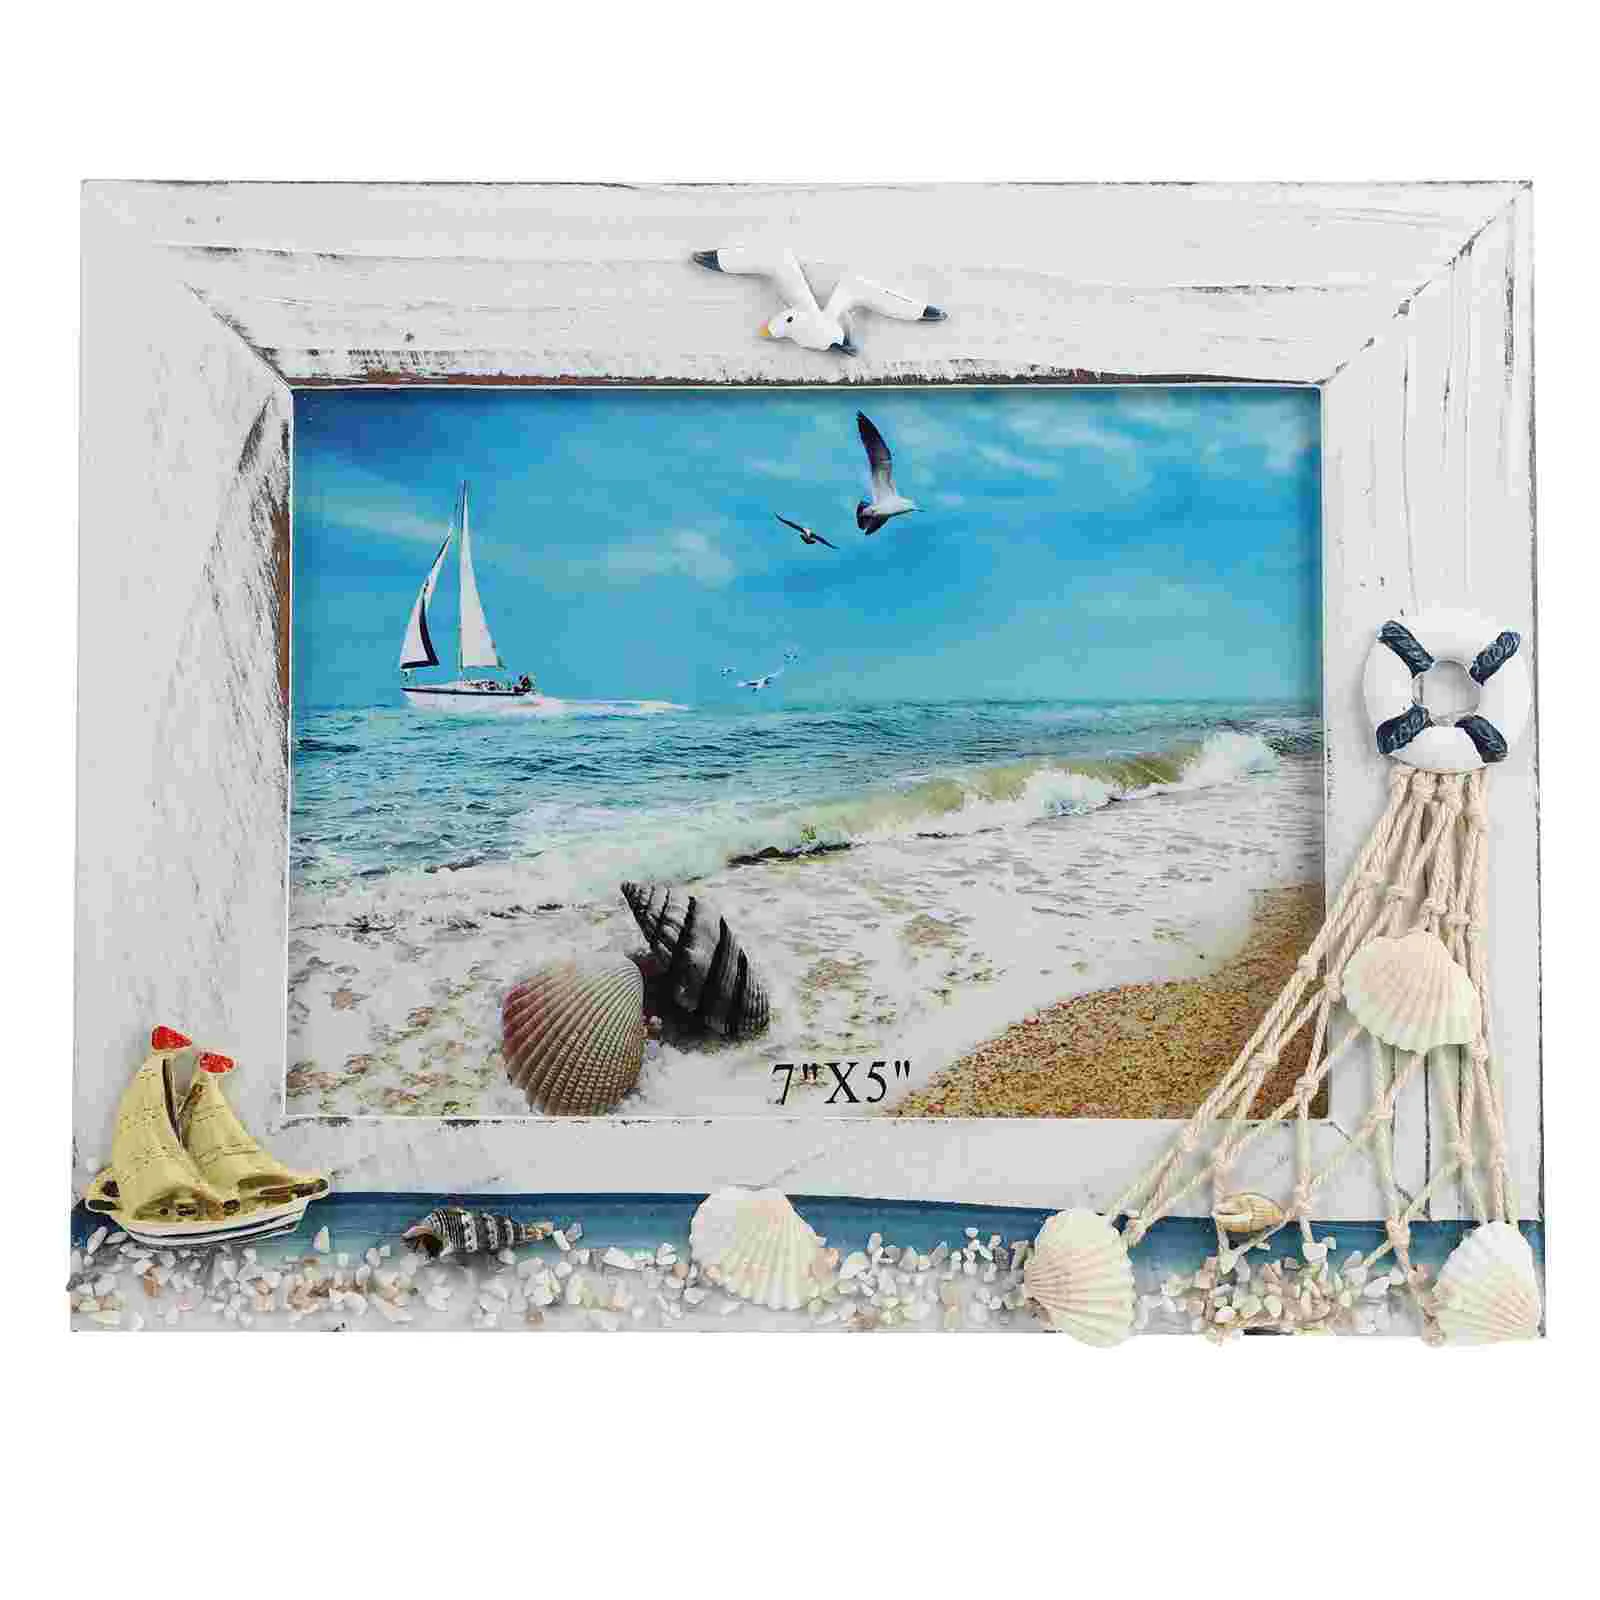 

Nautical Photo Picture Frames Frame Themed Table Seaside Coastal Ornament Ocean Collage Mediterranean Beach Stand Rustic